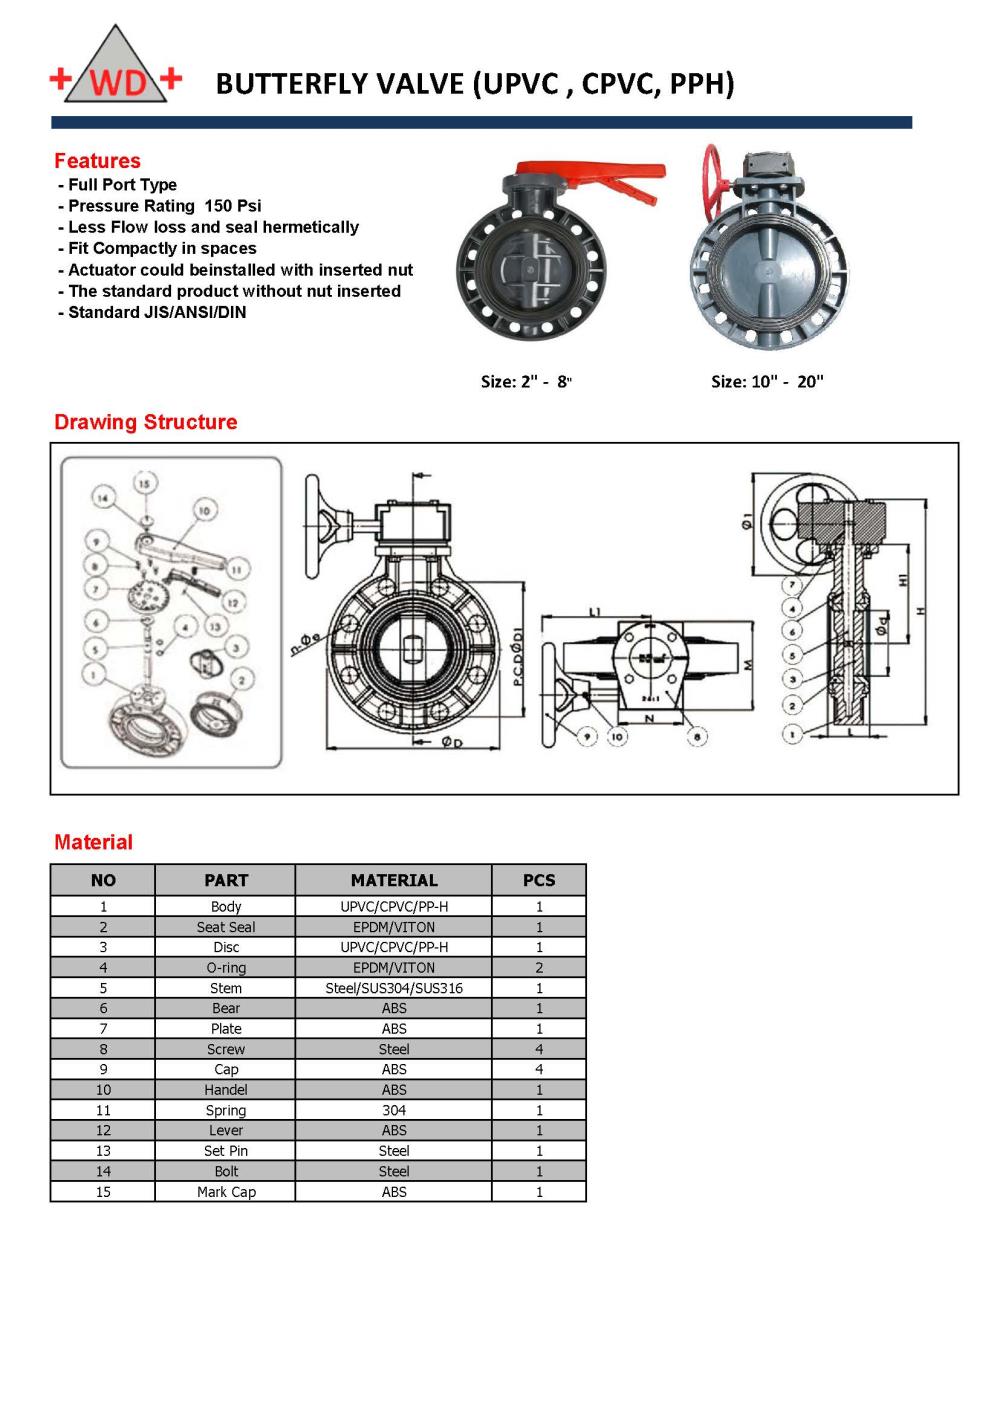 Butterfly Valve ,Butterfly Valve , Valve , UPVC Valve ,"WD",Pumps, Valves and Accessories/Valves/Butterfly Valves